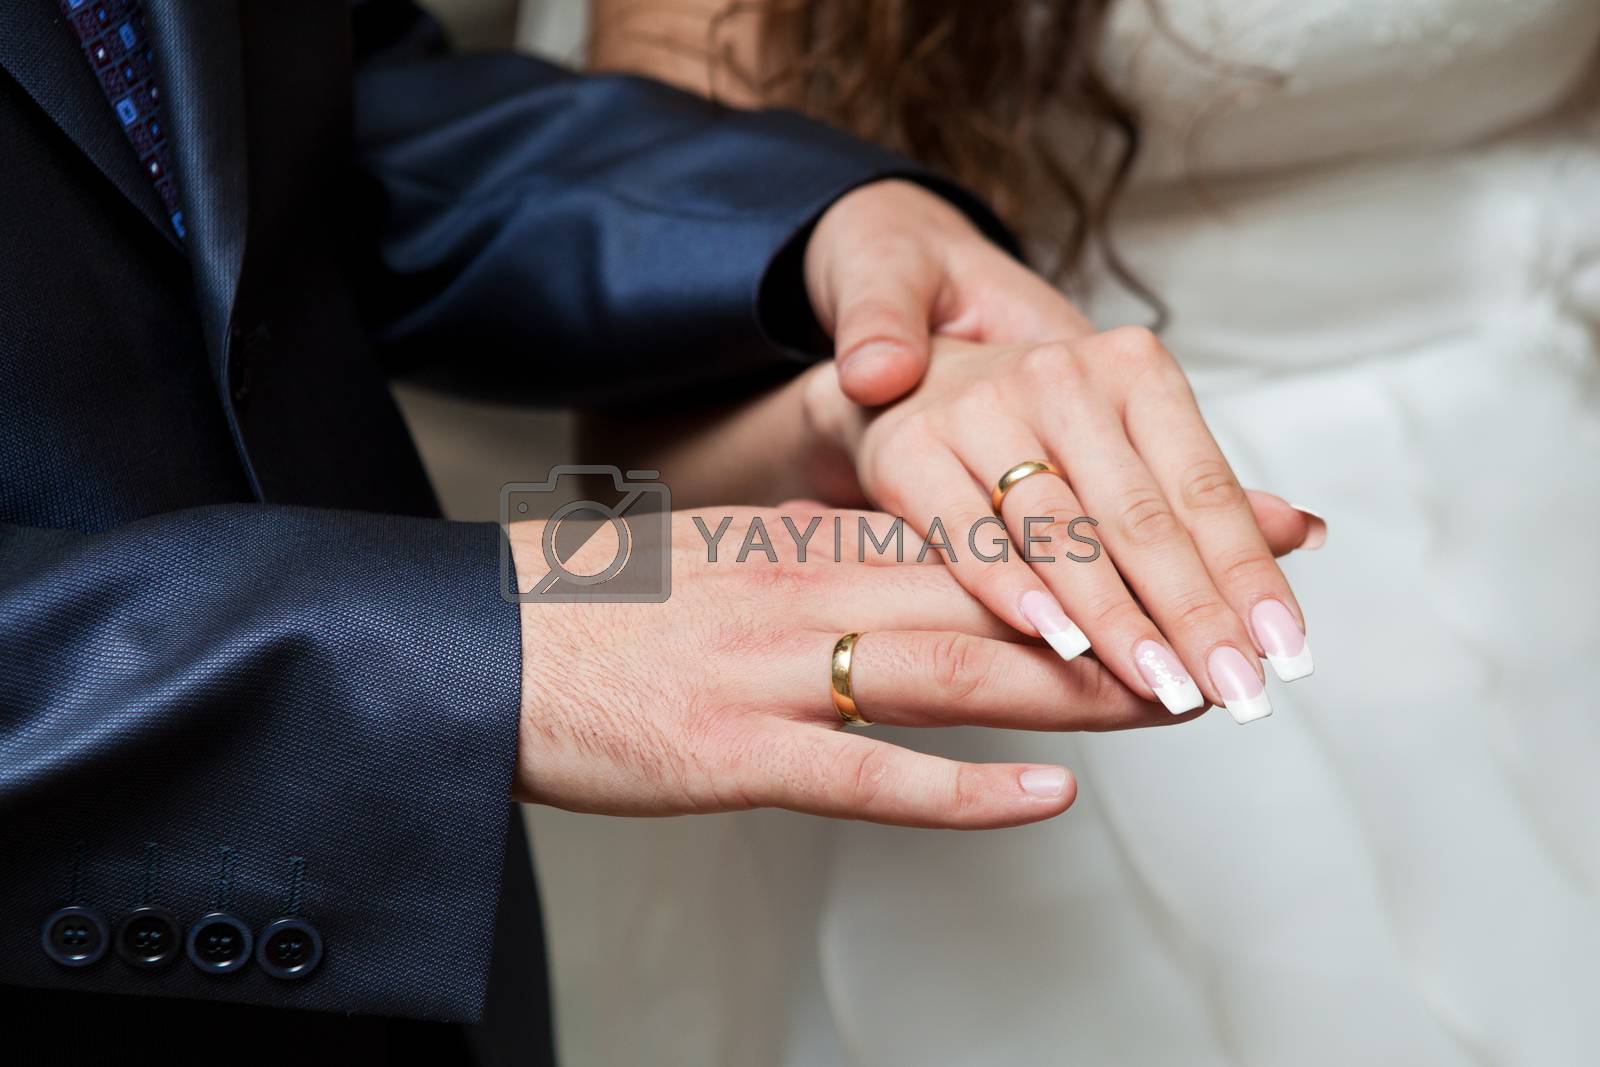 Royalty free image of hands with wedding rings by vsurkov